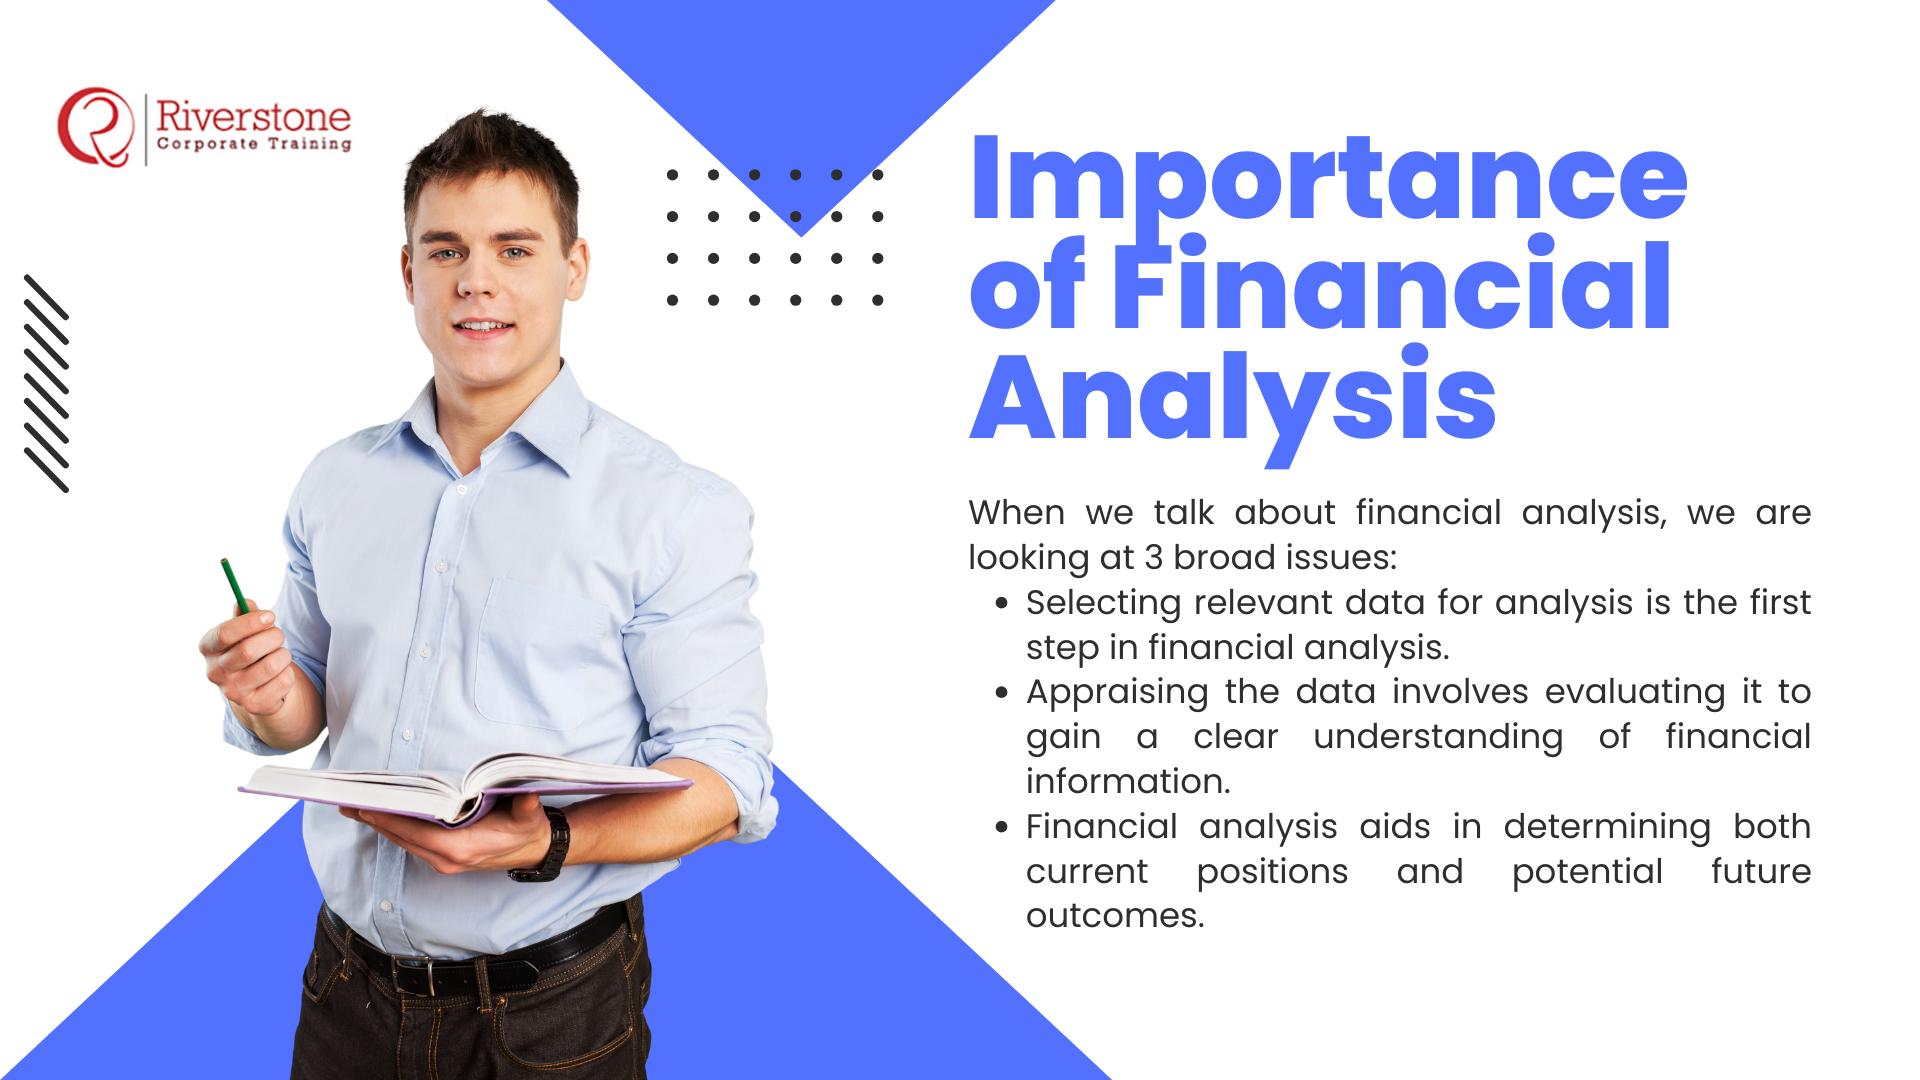 Importance of Financial Analysis